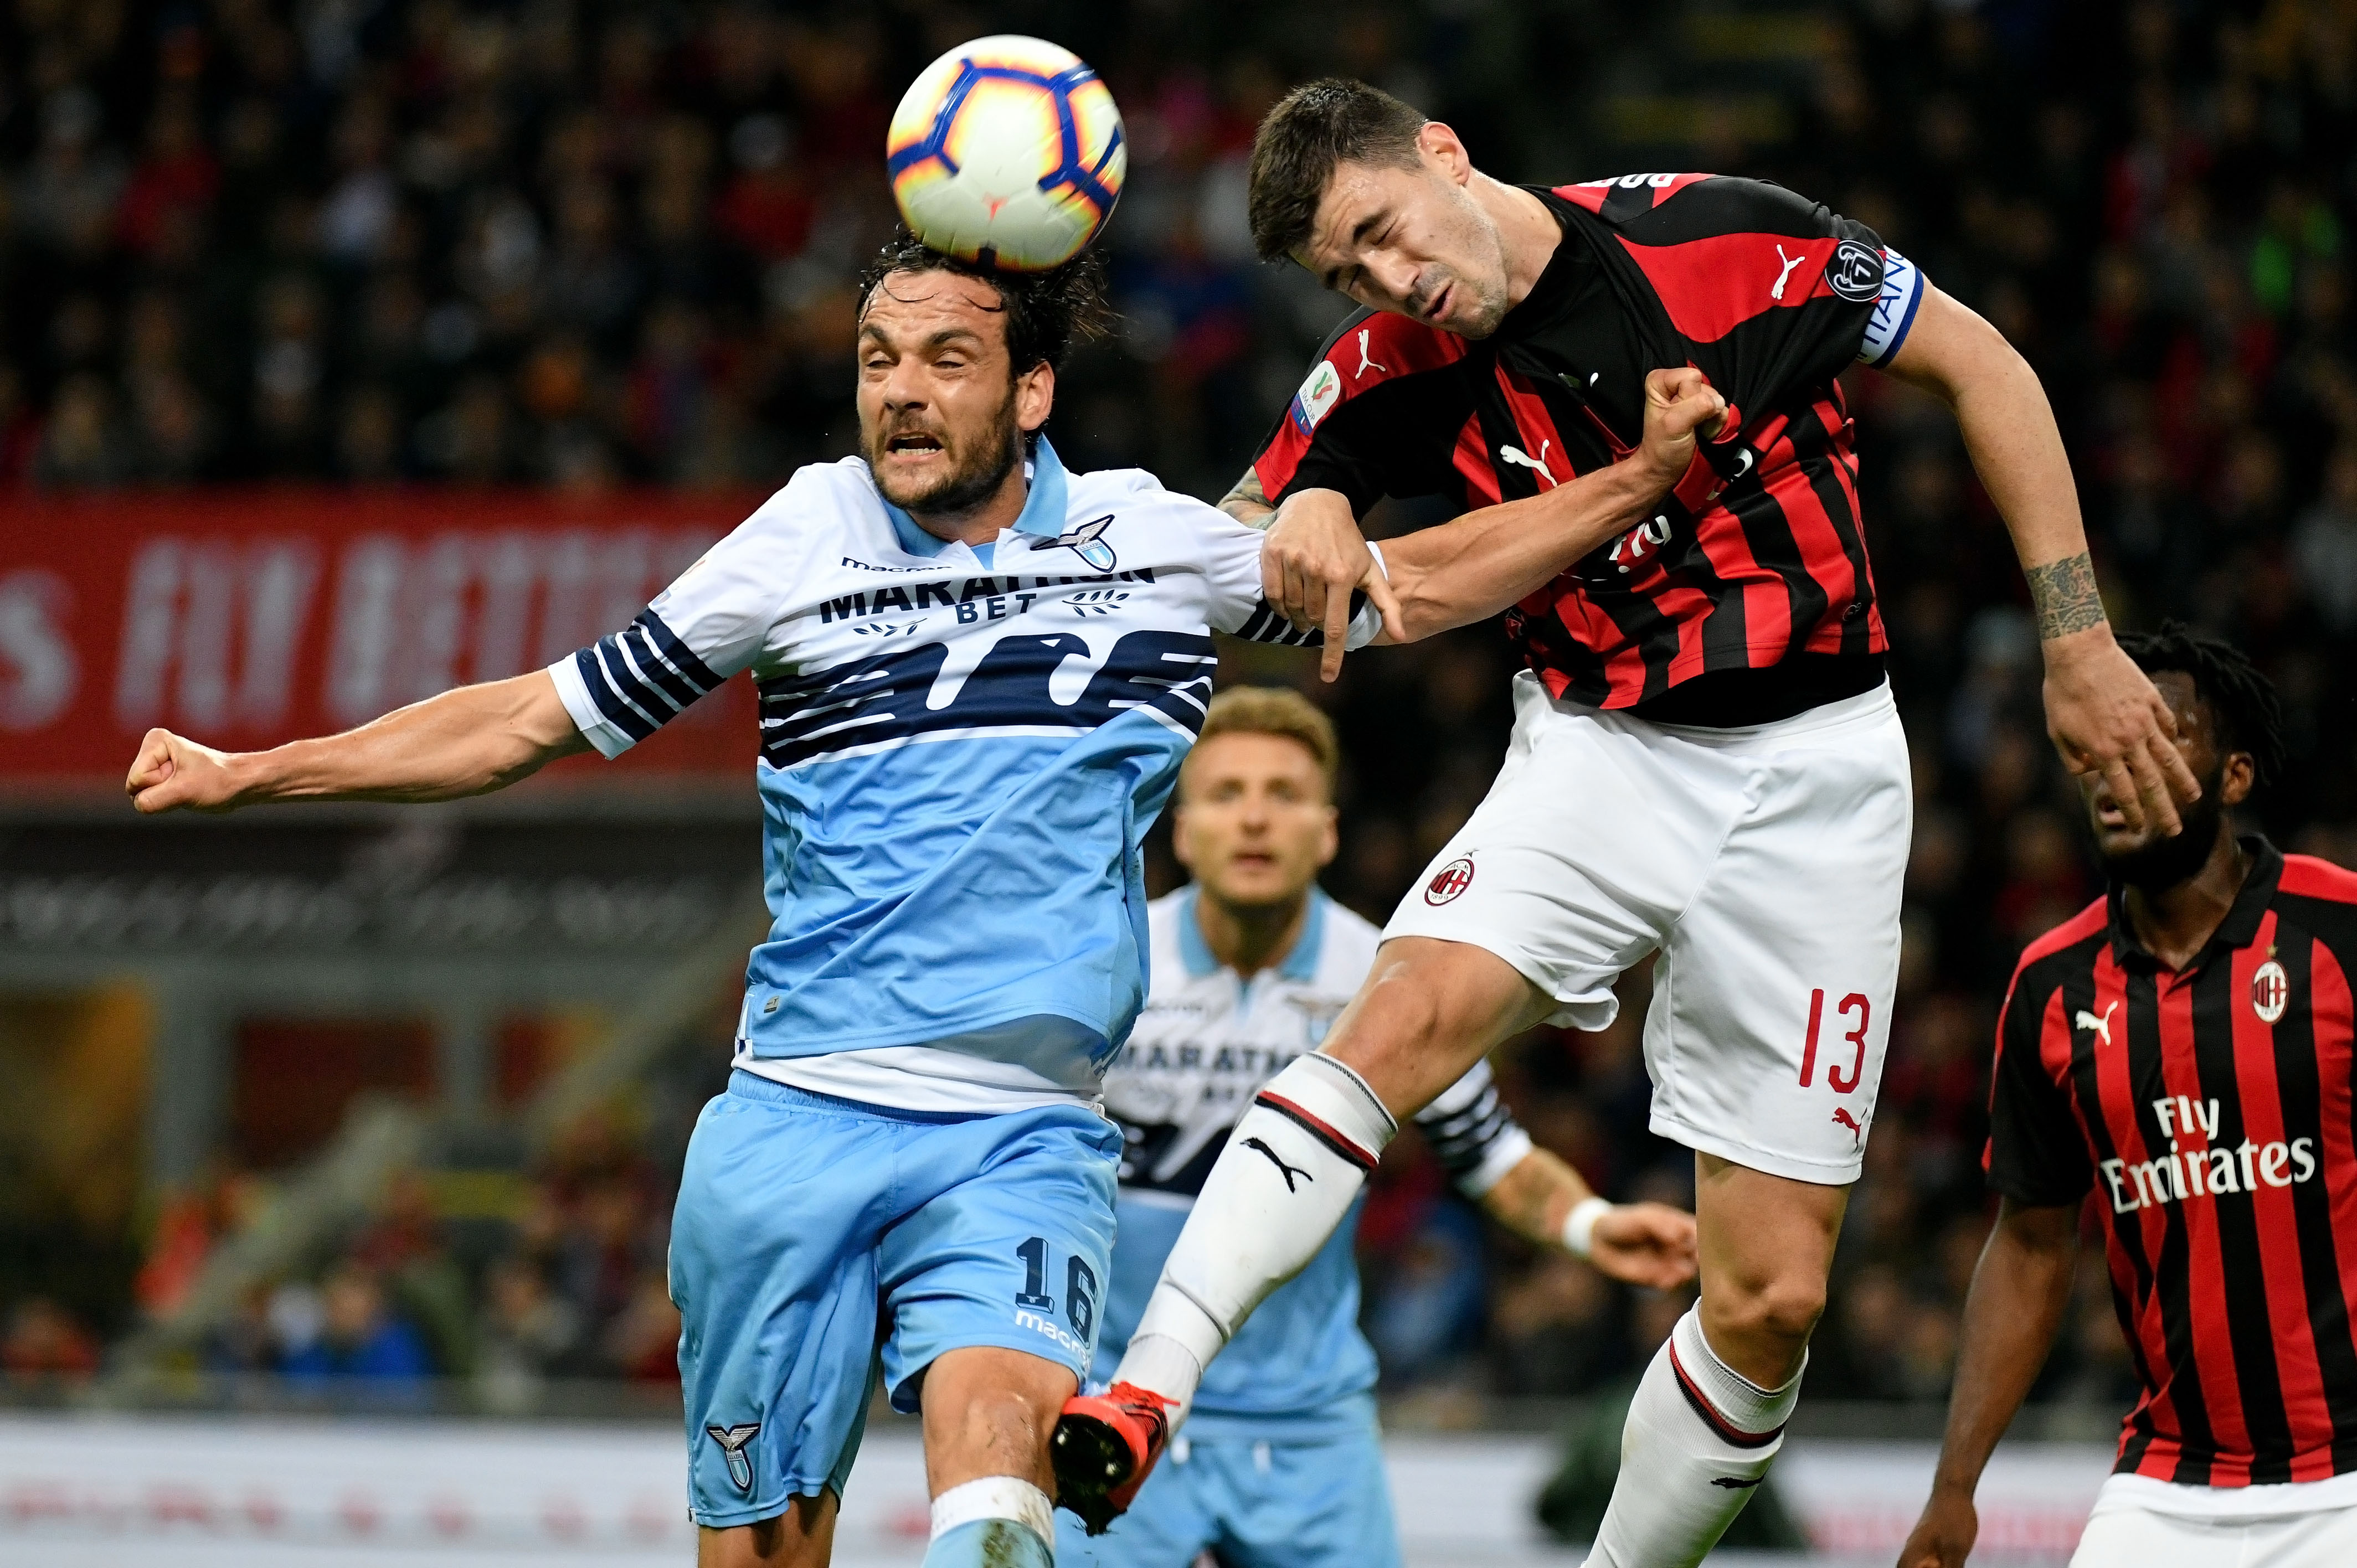 MILAN, ITALY - APRIL 24:  Alessio Romagnoli of AC Milan compete for the ball with Marco Parolo of SS Lazio during the TIM Cup match between AC Milan and SS Lazio at Stadio Giuseppe Meazza on April 24, 2019 in Milan, Italy.  (Photo by Marco Rosi/Getty Images)